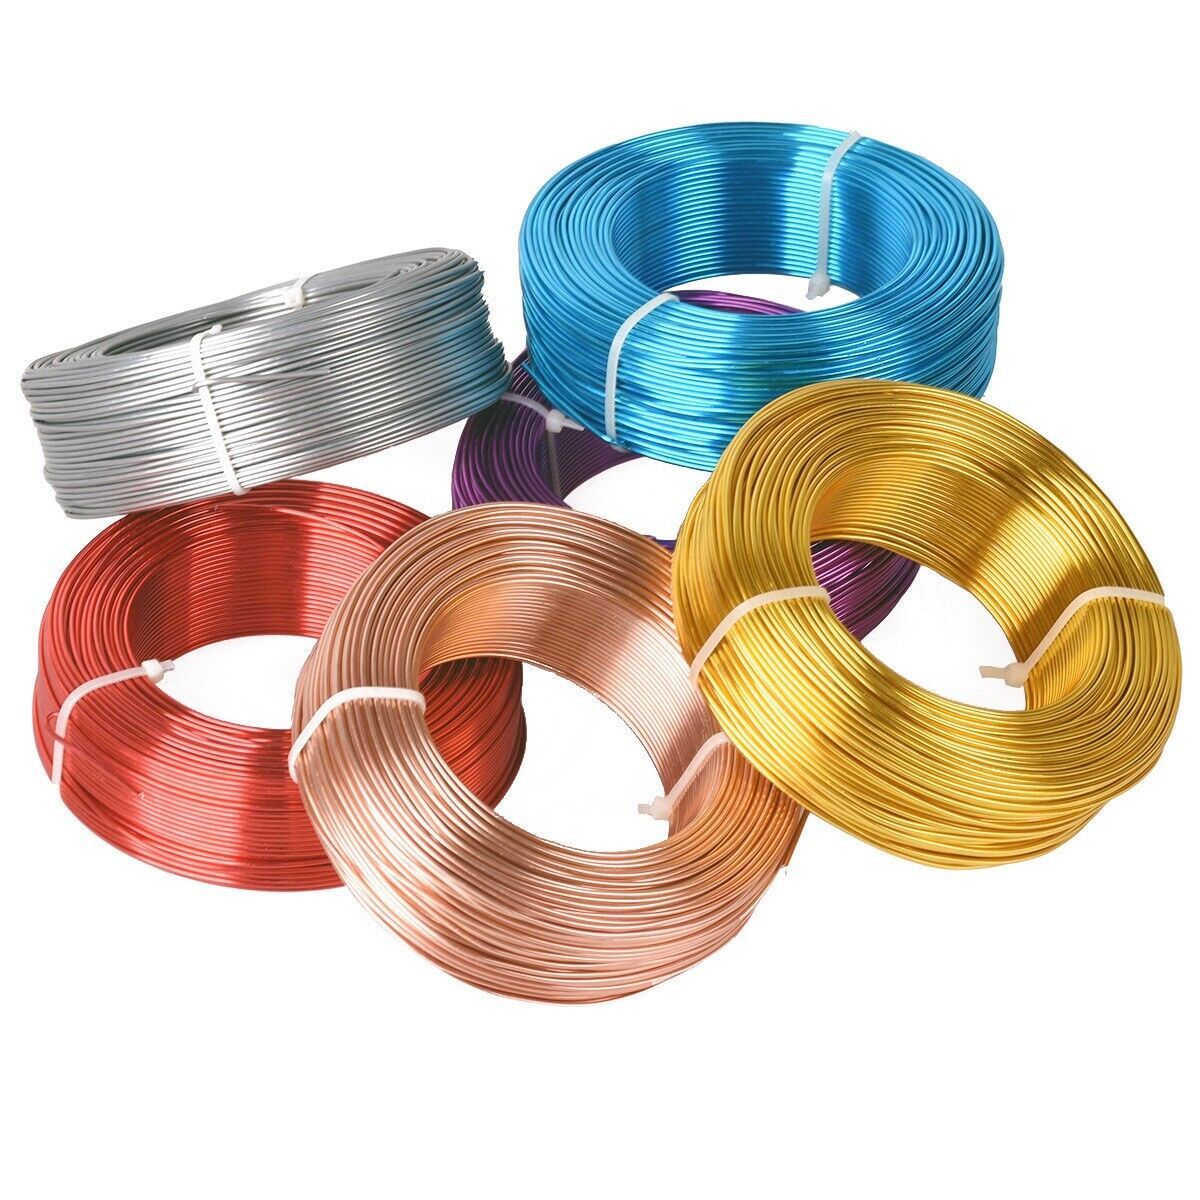 Large Roll Colorful Soft Aluminum Metal Beadding Wire Tiger Tail Craft Wire Cord